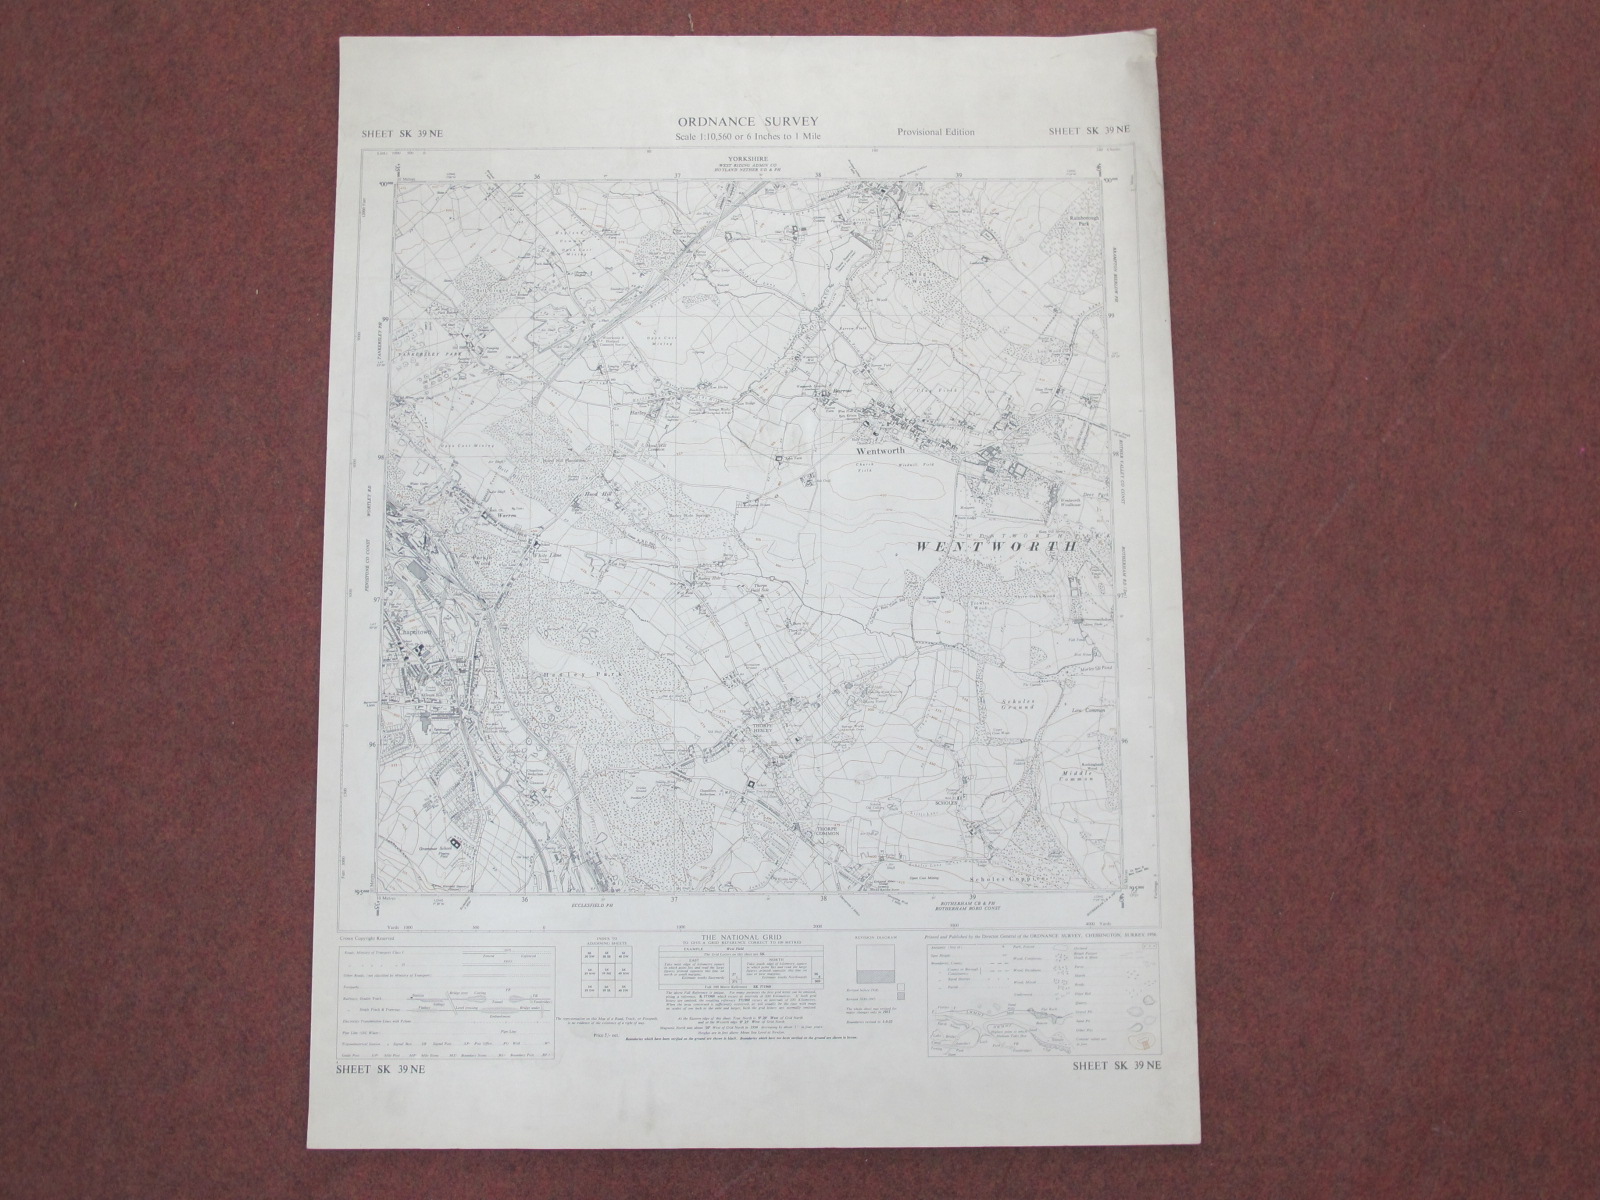 West Riding Yorkshire Maps, Rotherham and area, some dates noted - 1889, 1903, 1959, 1960, various - Image 8 of 10